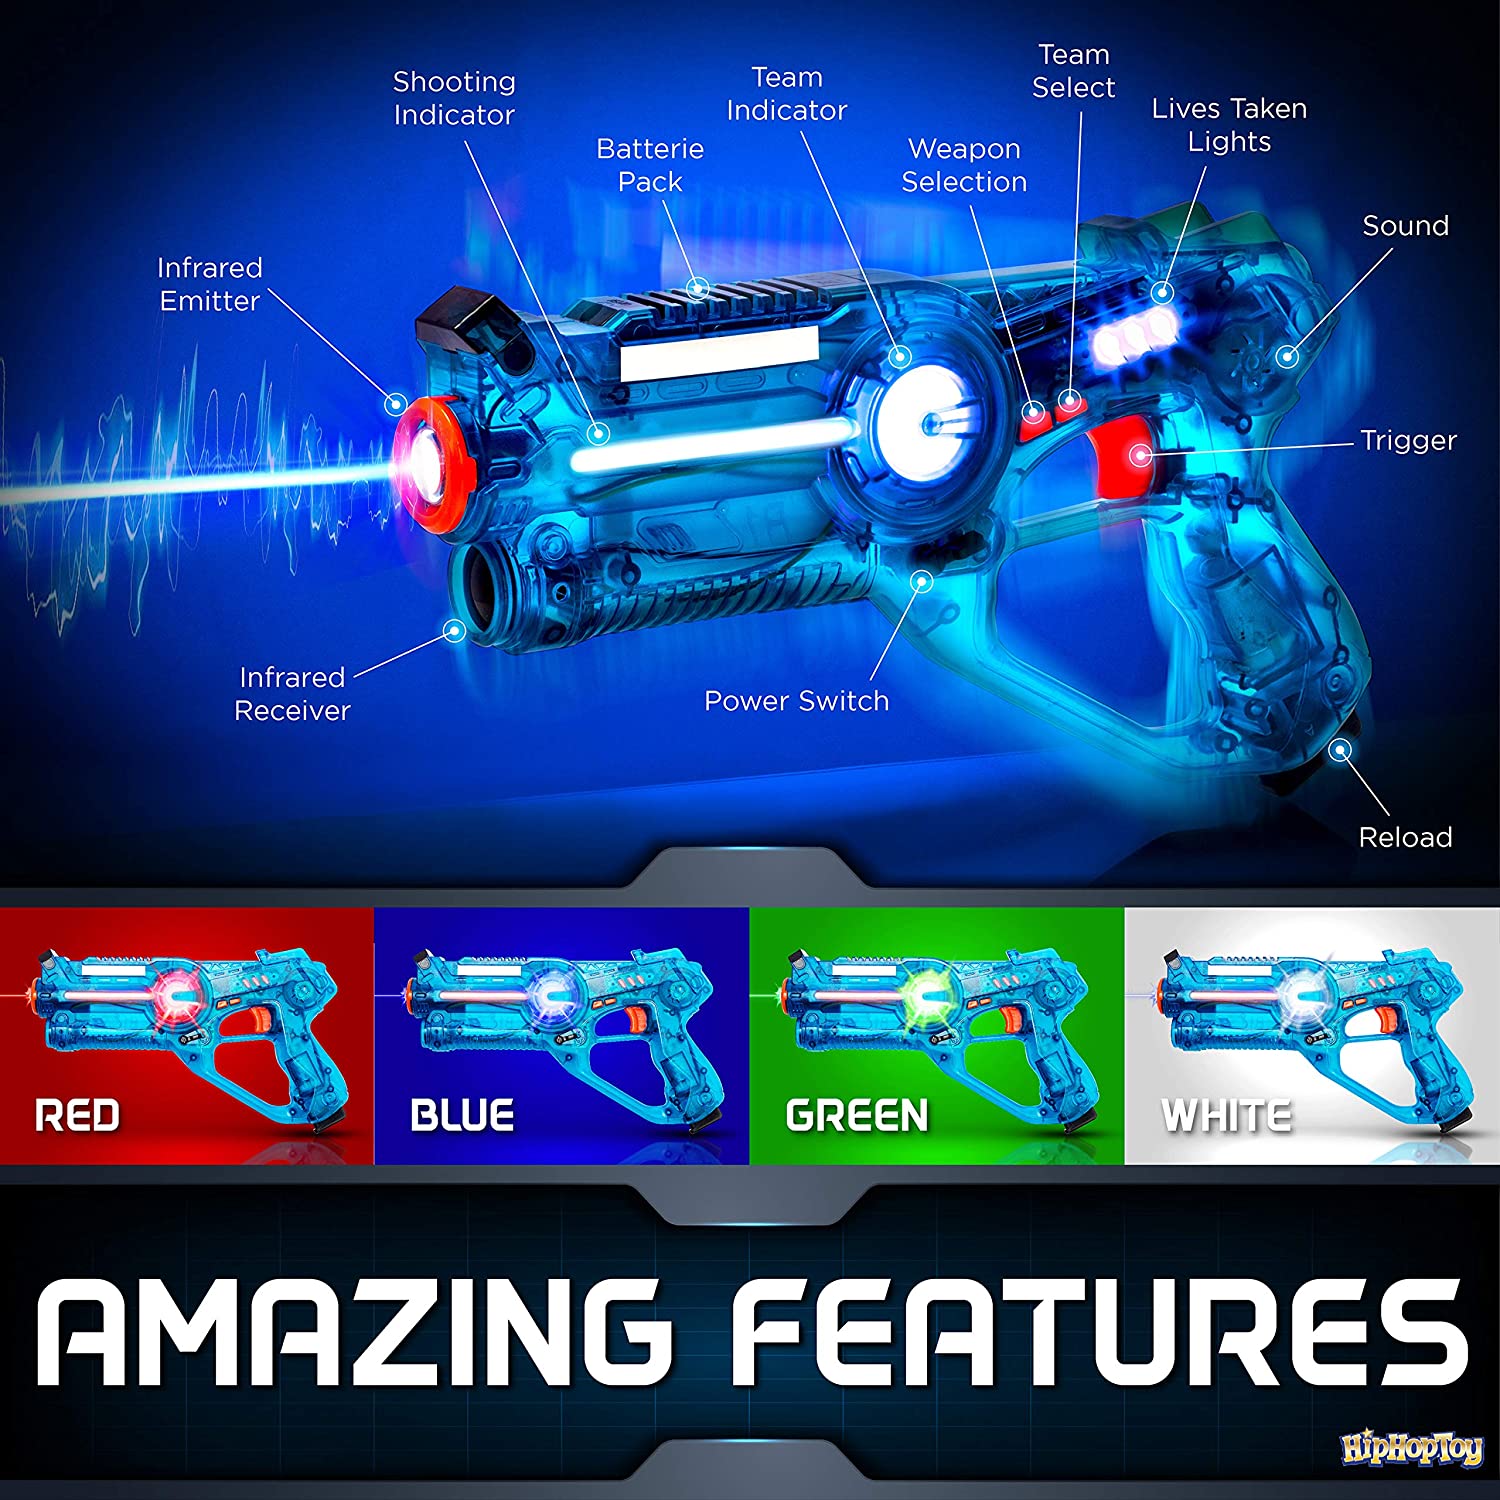 Kids Laser Tag Gun Game with Flying Toy Drone Target, Infrared Lazer Shooting Game for Children with Fun LED Effects, Sounds, and 4 Gun Modes, Best Gift for Boys Ages-(5 to 10)